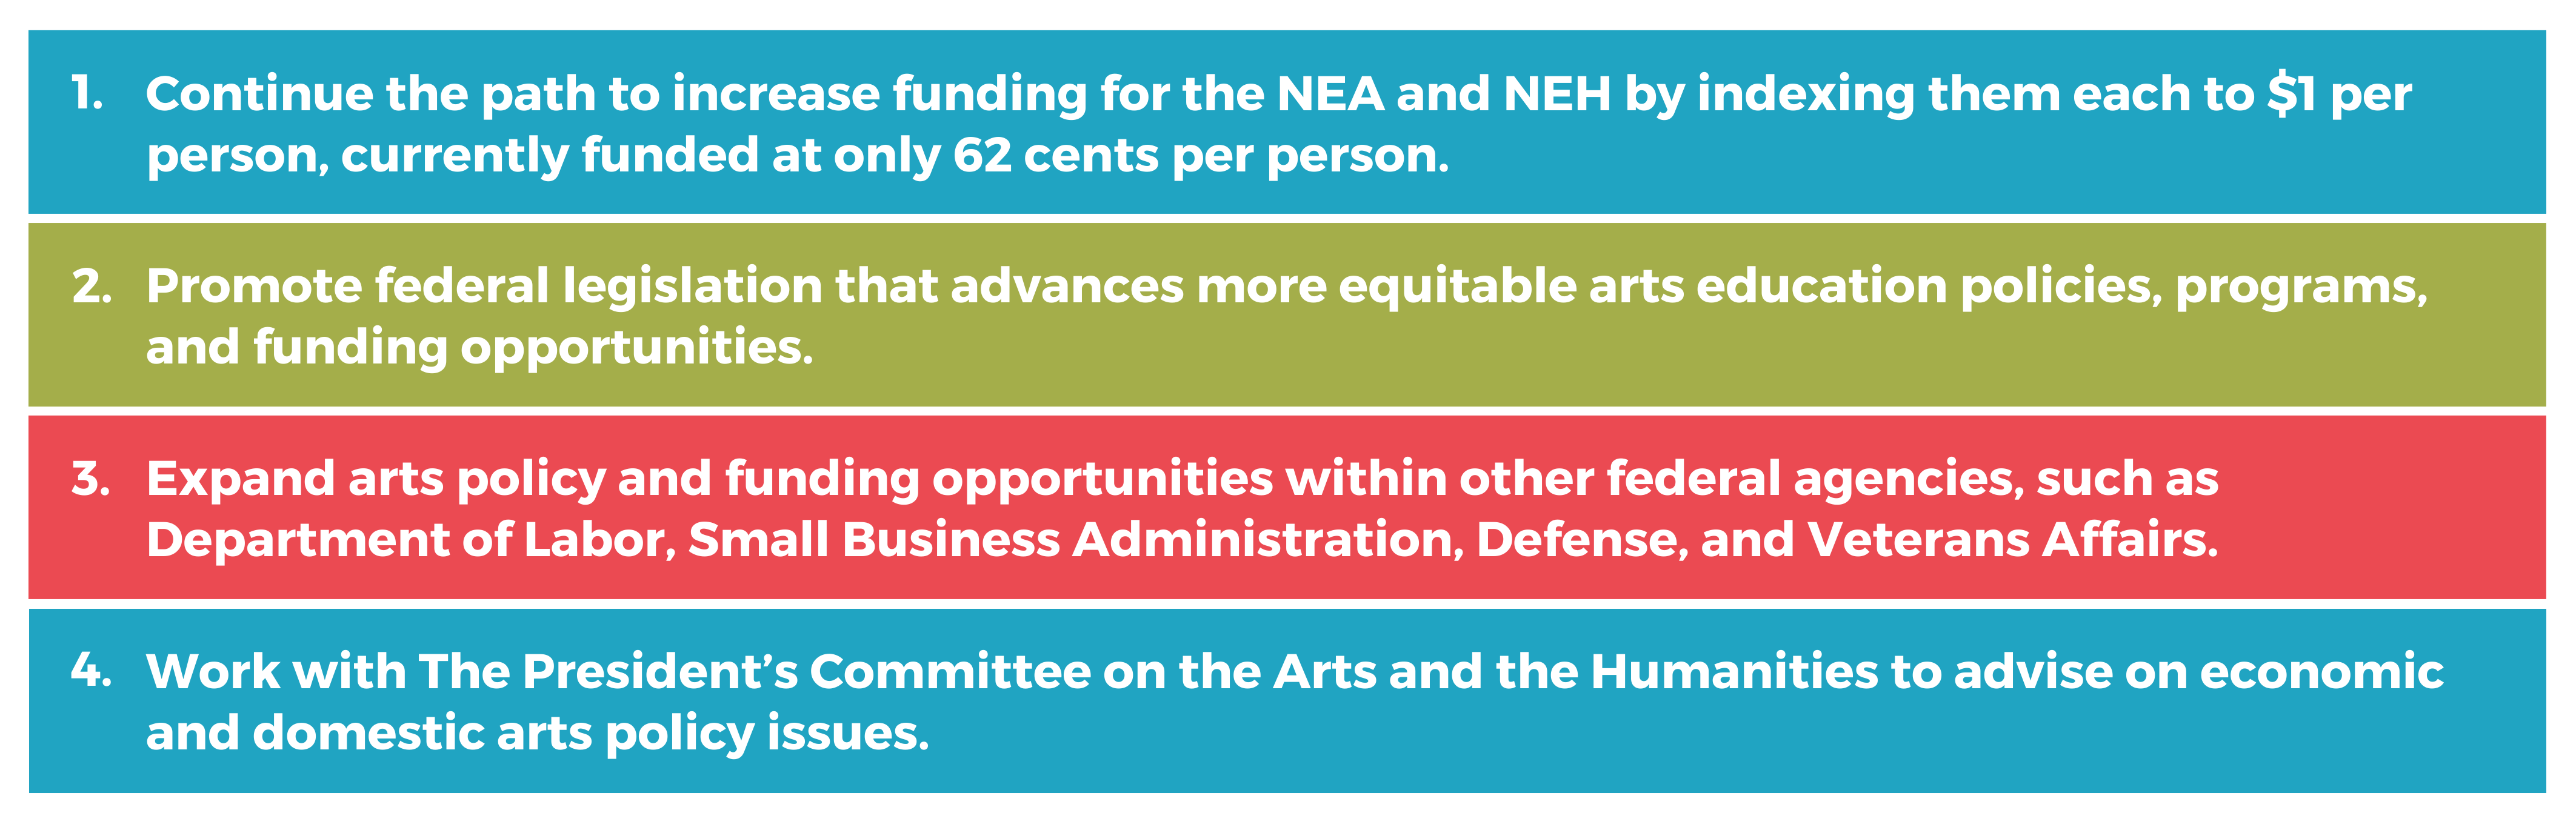 1. Continue the path to increase funding for the NEA and NEH by indexing them each to $1 per person, currently funded at only 62 cents per person. 2. Promote federal legislation that advances more equitable arts education policies, programs, and funding opportunities. 3. Expand arts policy and funding opportunities within other federal agencies, such as Department of Labor, Small Business Administration, Defense, and Veterans Affairs. 4. Work with The President’s Committee on the Arts and the Humanities to advise on economic and domestic arts policy issues.